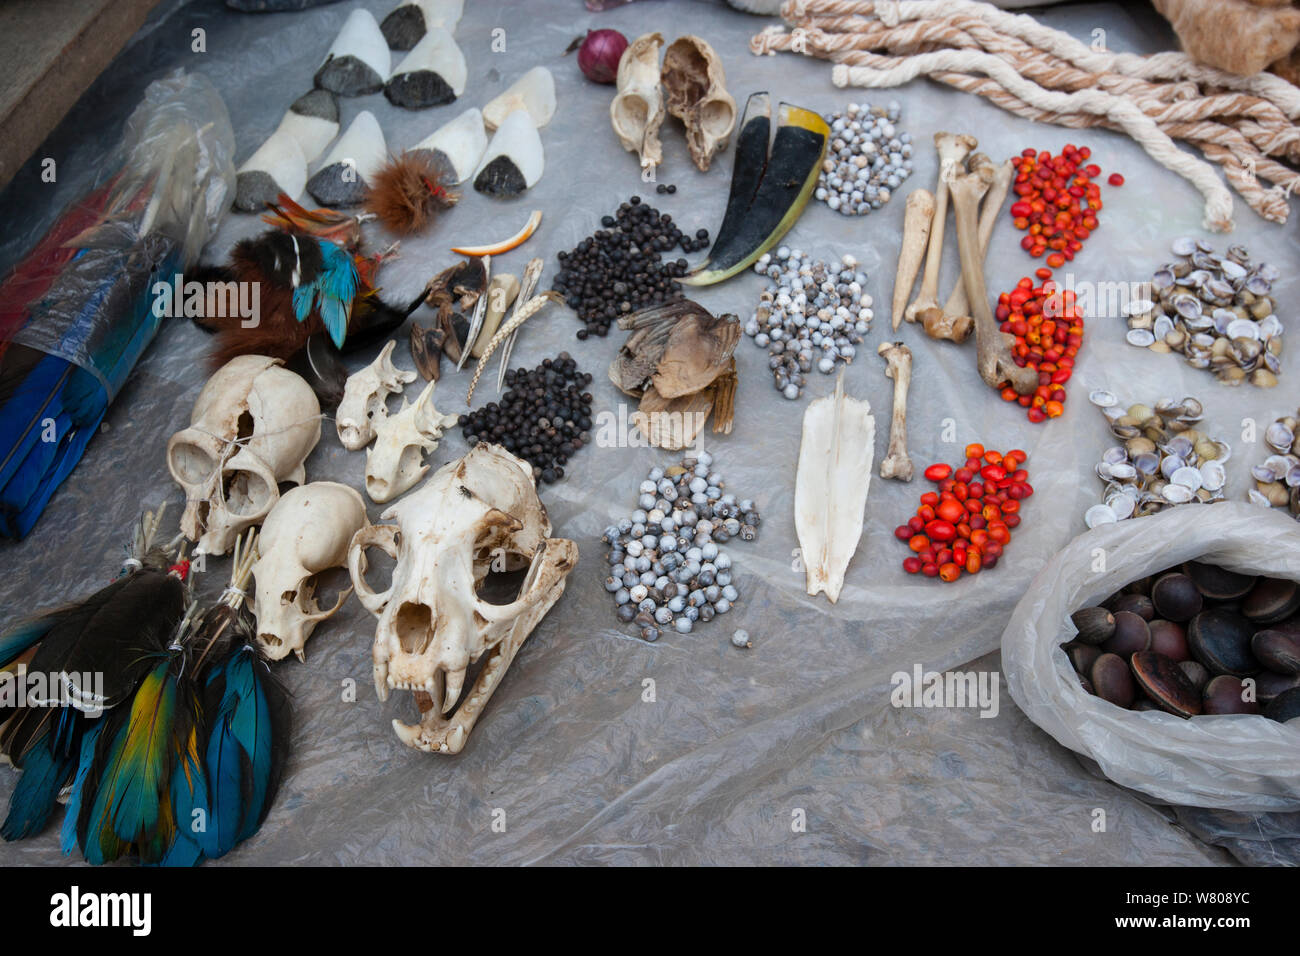 Traditional talismans, and medicines, for sale in Yurimaguas market, Amazon, Peru. November 2006. Stock Photo